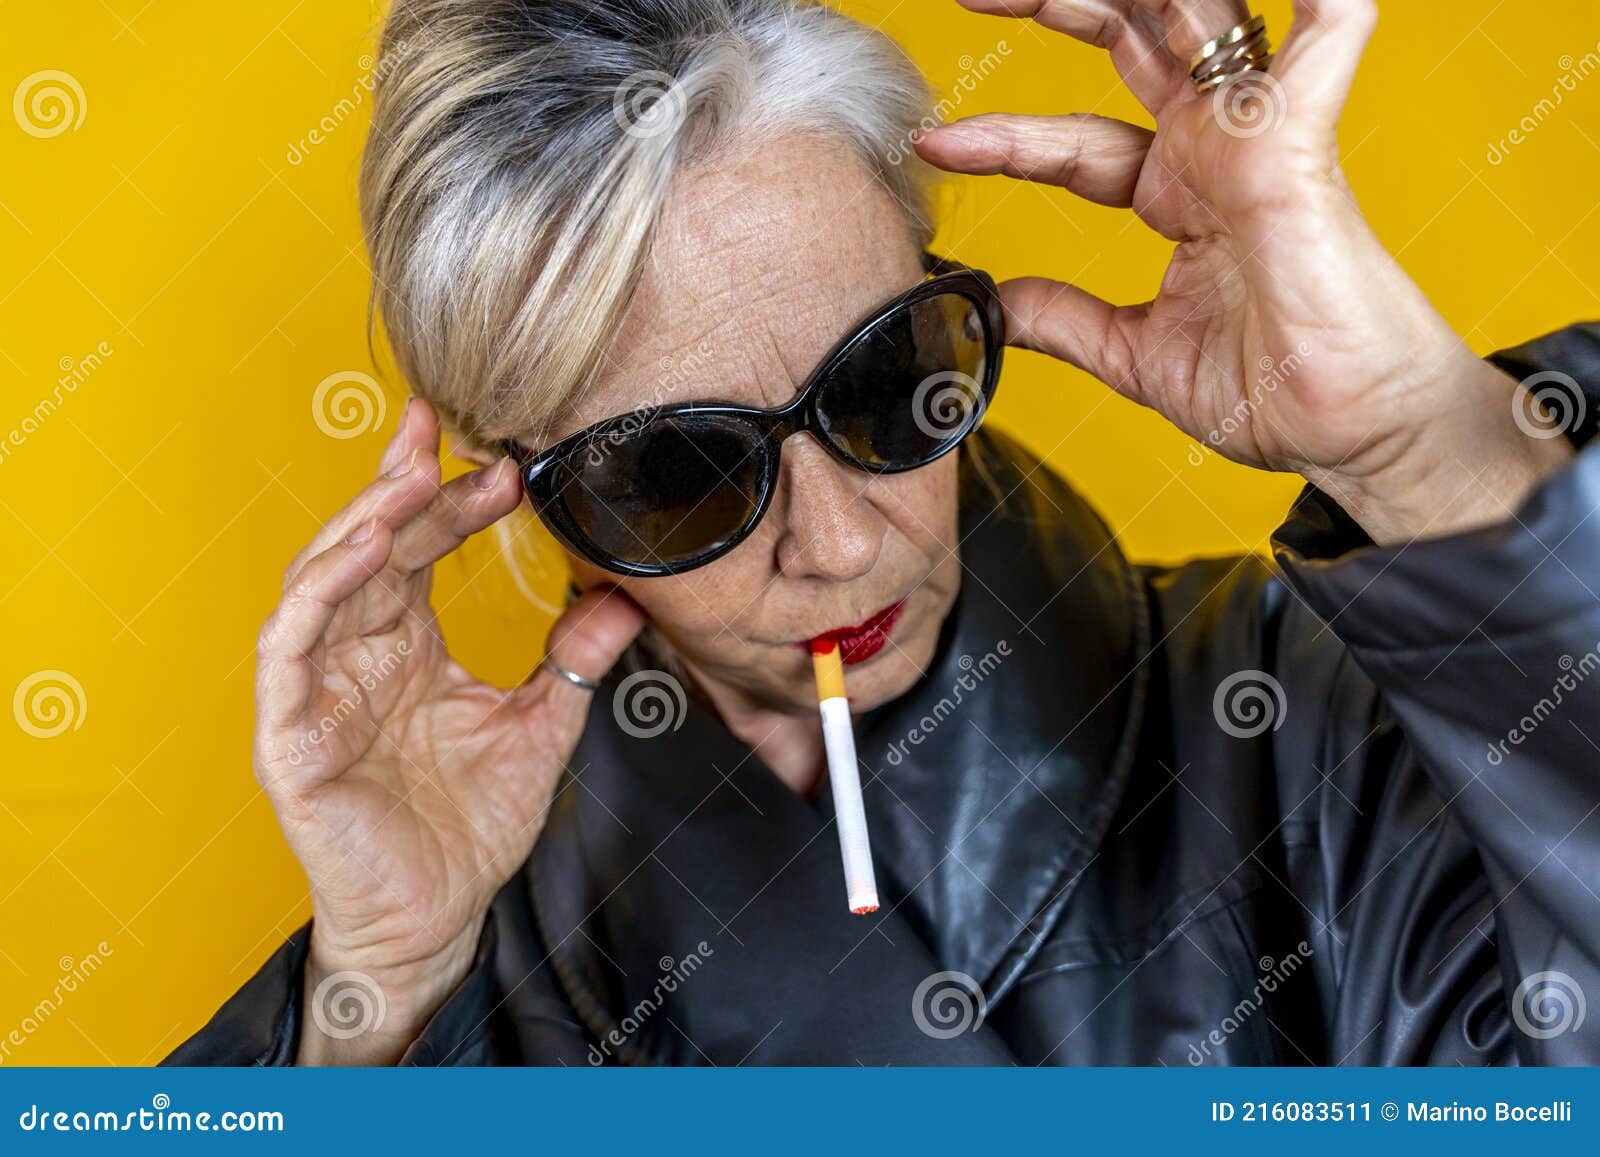 Funny Portrait of Mature Woman. Sophisticated Lady Having Fun Dressed in a  Leather Coat Smoking a Cigarette Stock Image - Image of fatale, concert:  216083511